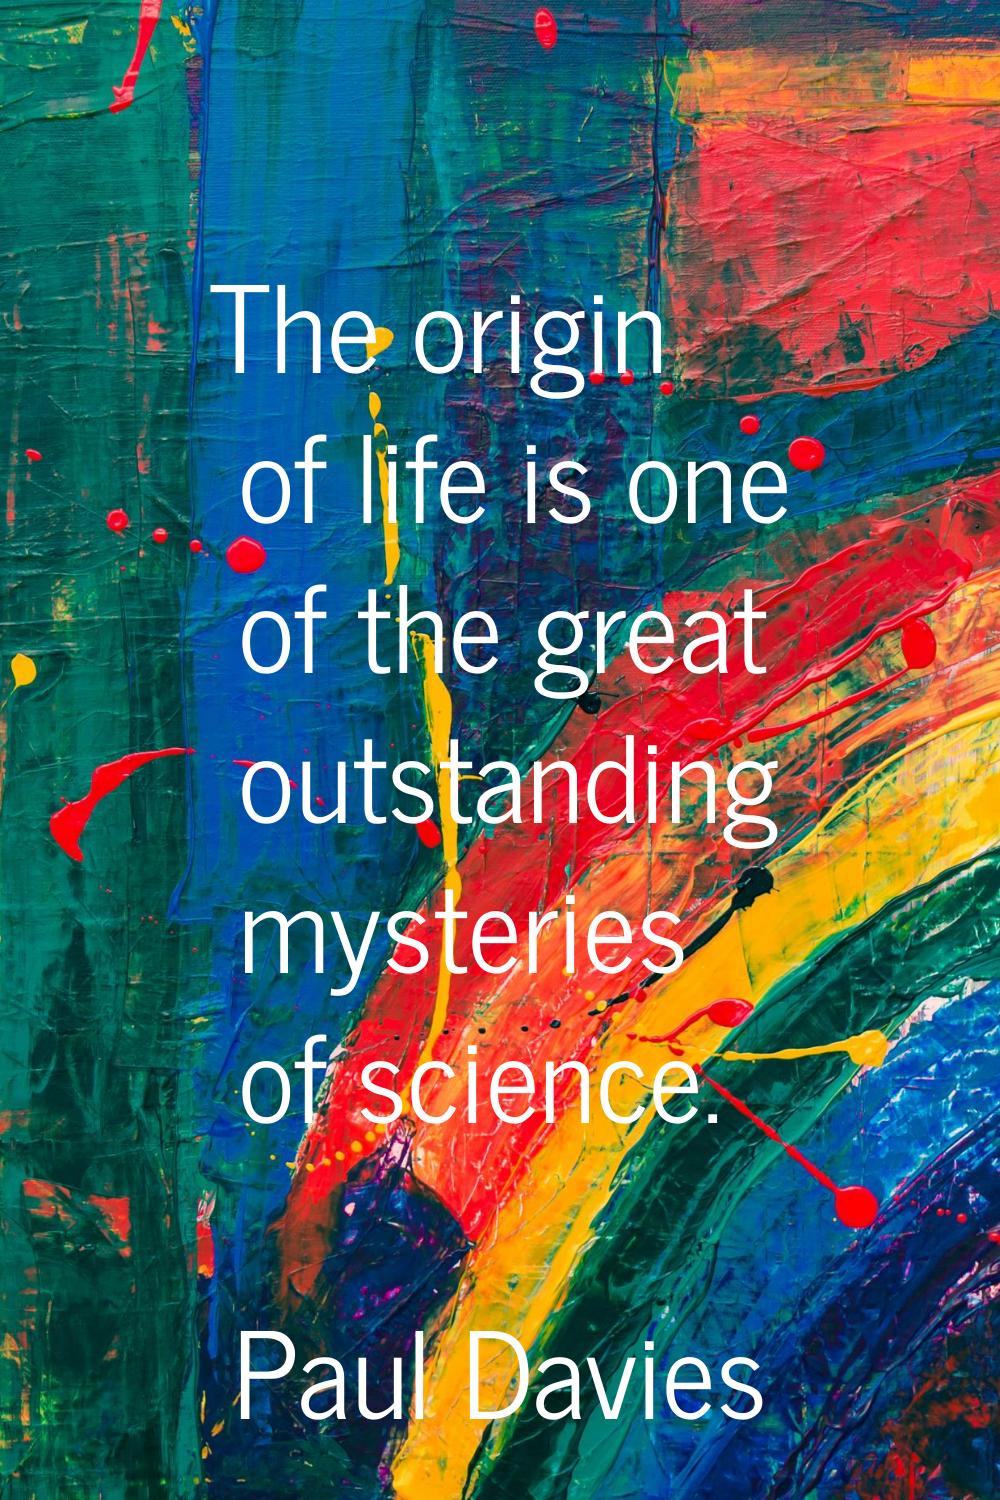 The origin of life is one of the great outstanding mysteries of science.